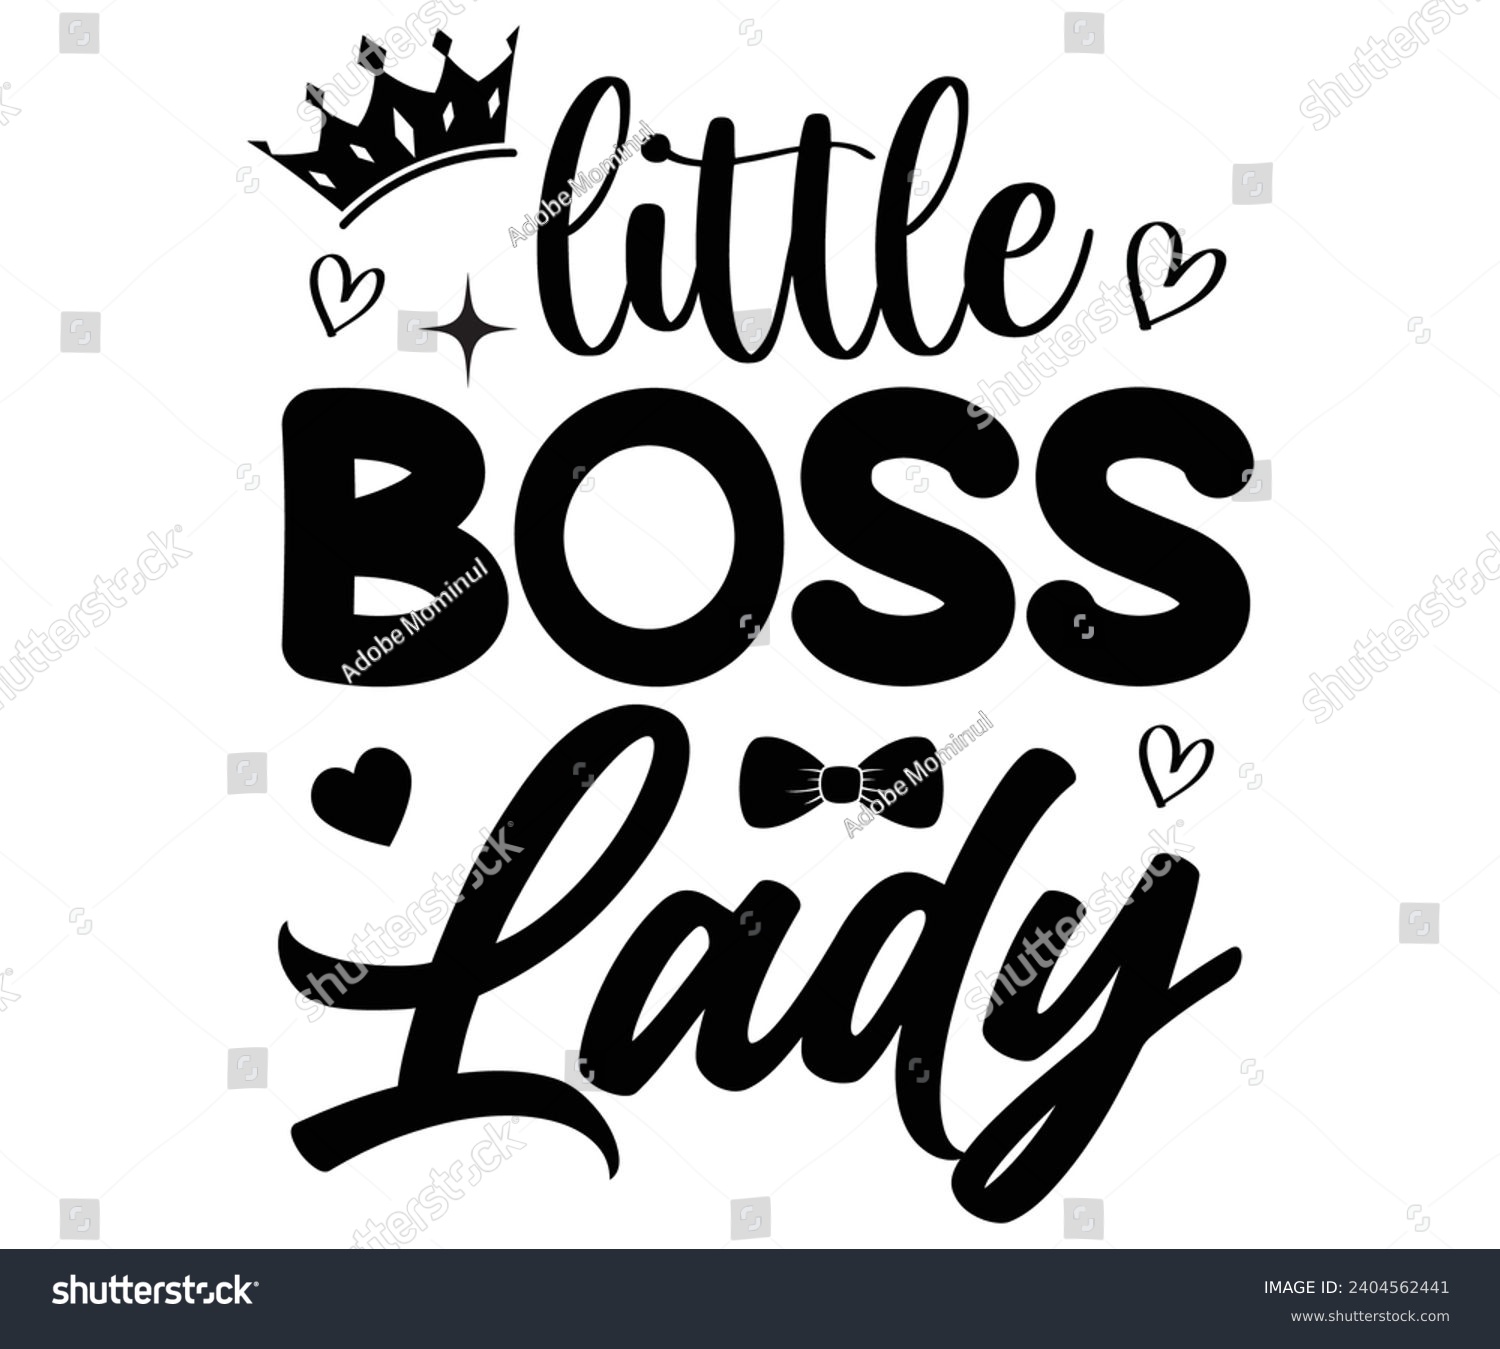 SVG of Little Boss Lady Svg,Happy Boss Day svg,Boss Saying Quotes,Boss Day T-shirt,Gift for Boss,Great Jobs,Happy Bosses Day t-shirt,Girl Boss Shirt,Motivational Boss,Cut File,Circut And Silhouette. svg